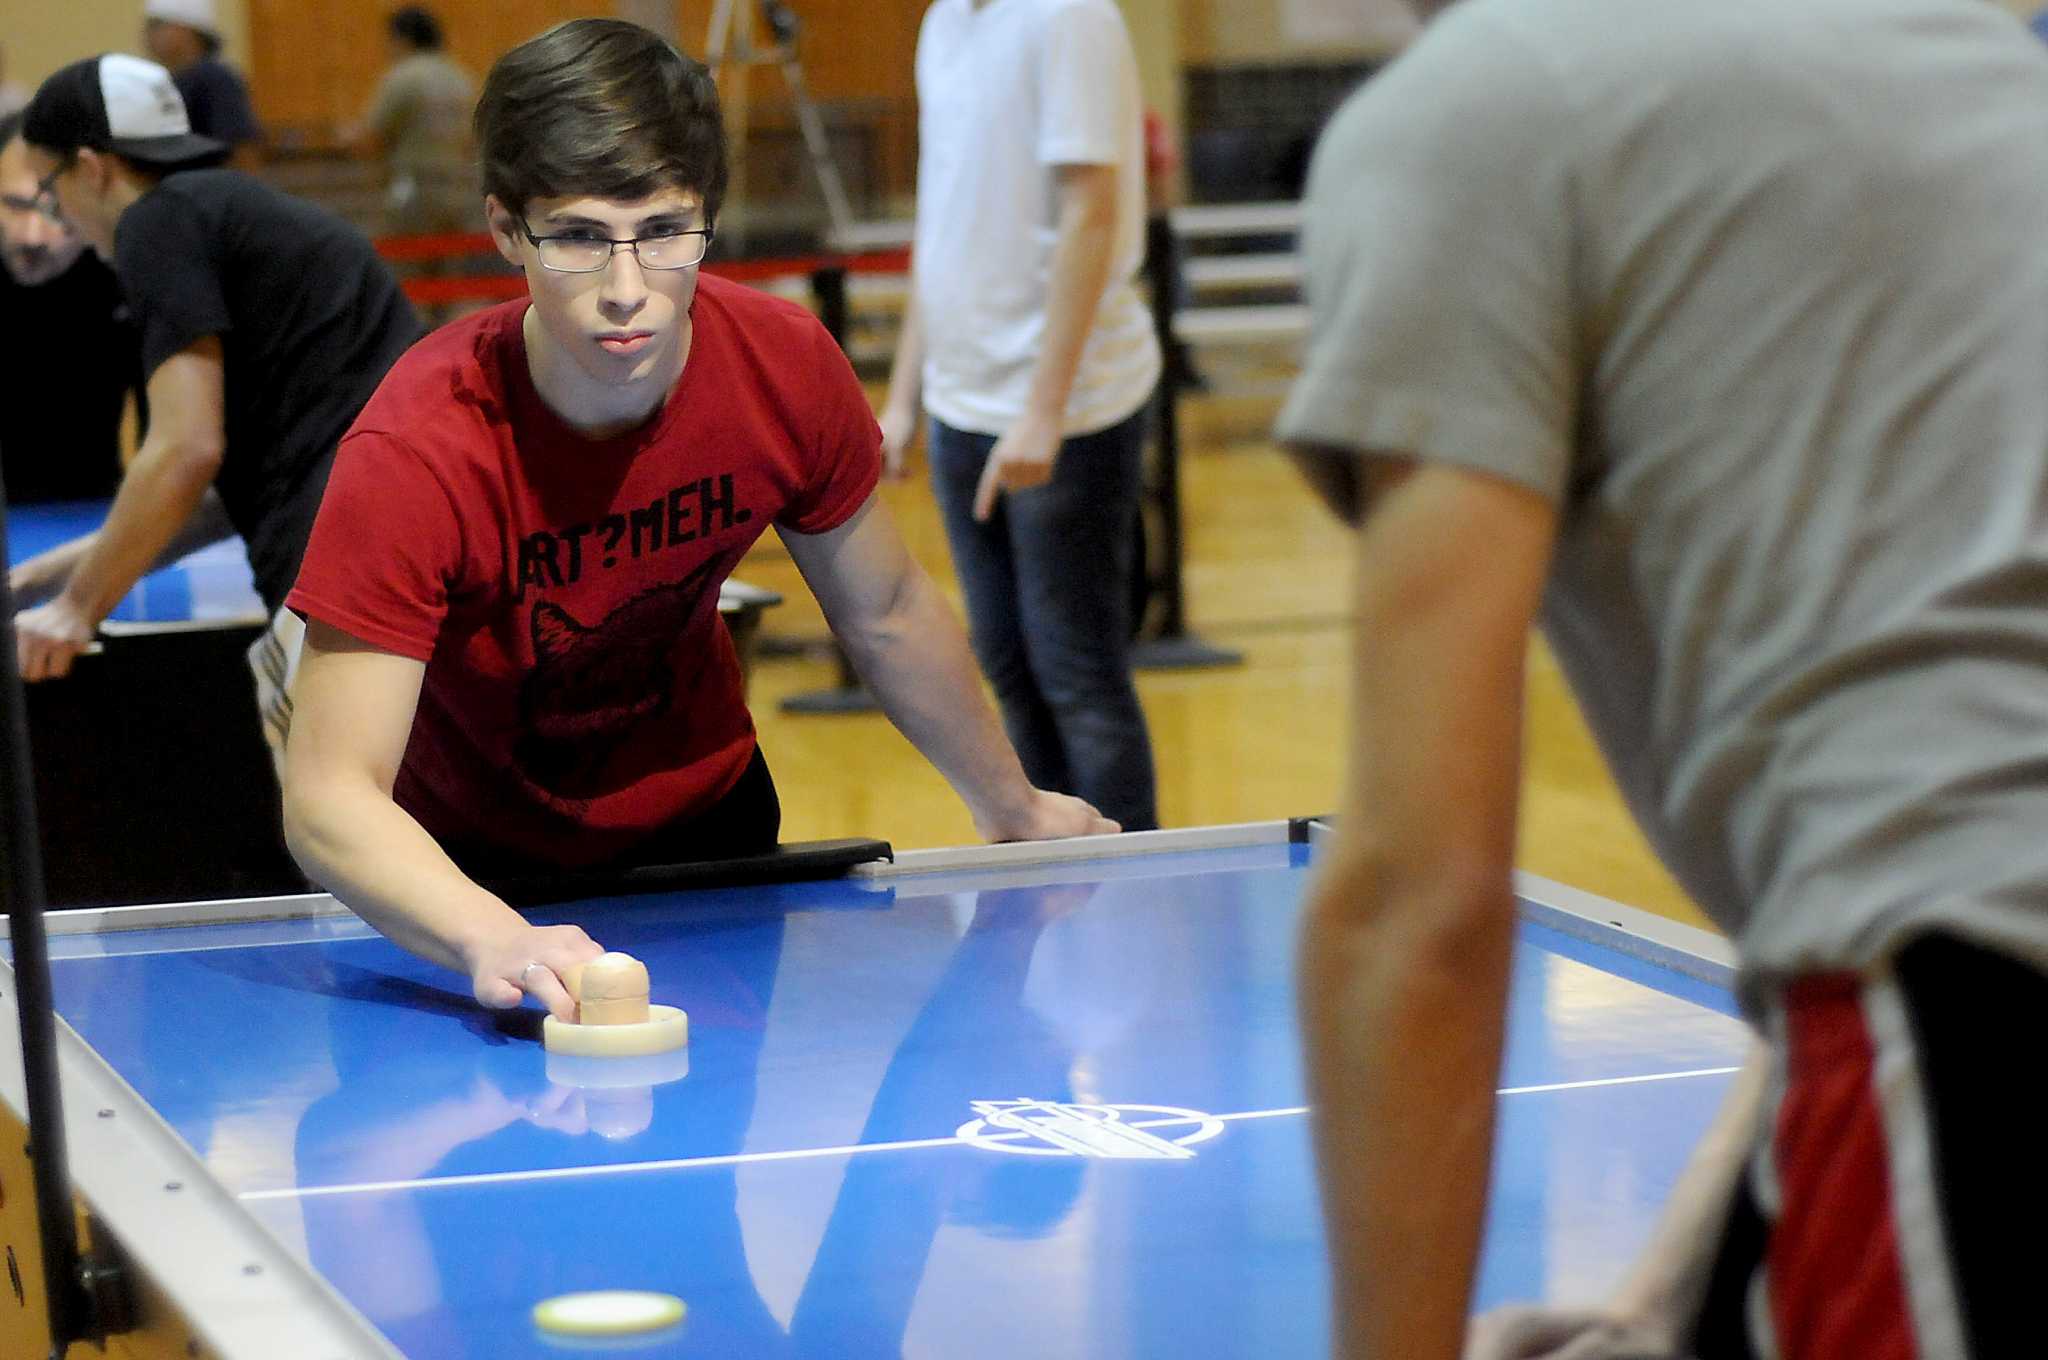 Dozens descend on UH to claim title of air hockey world champion